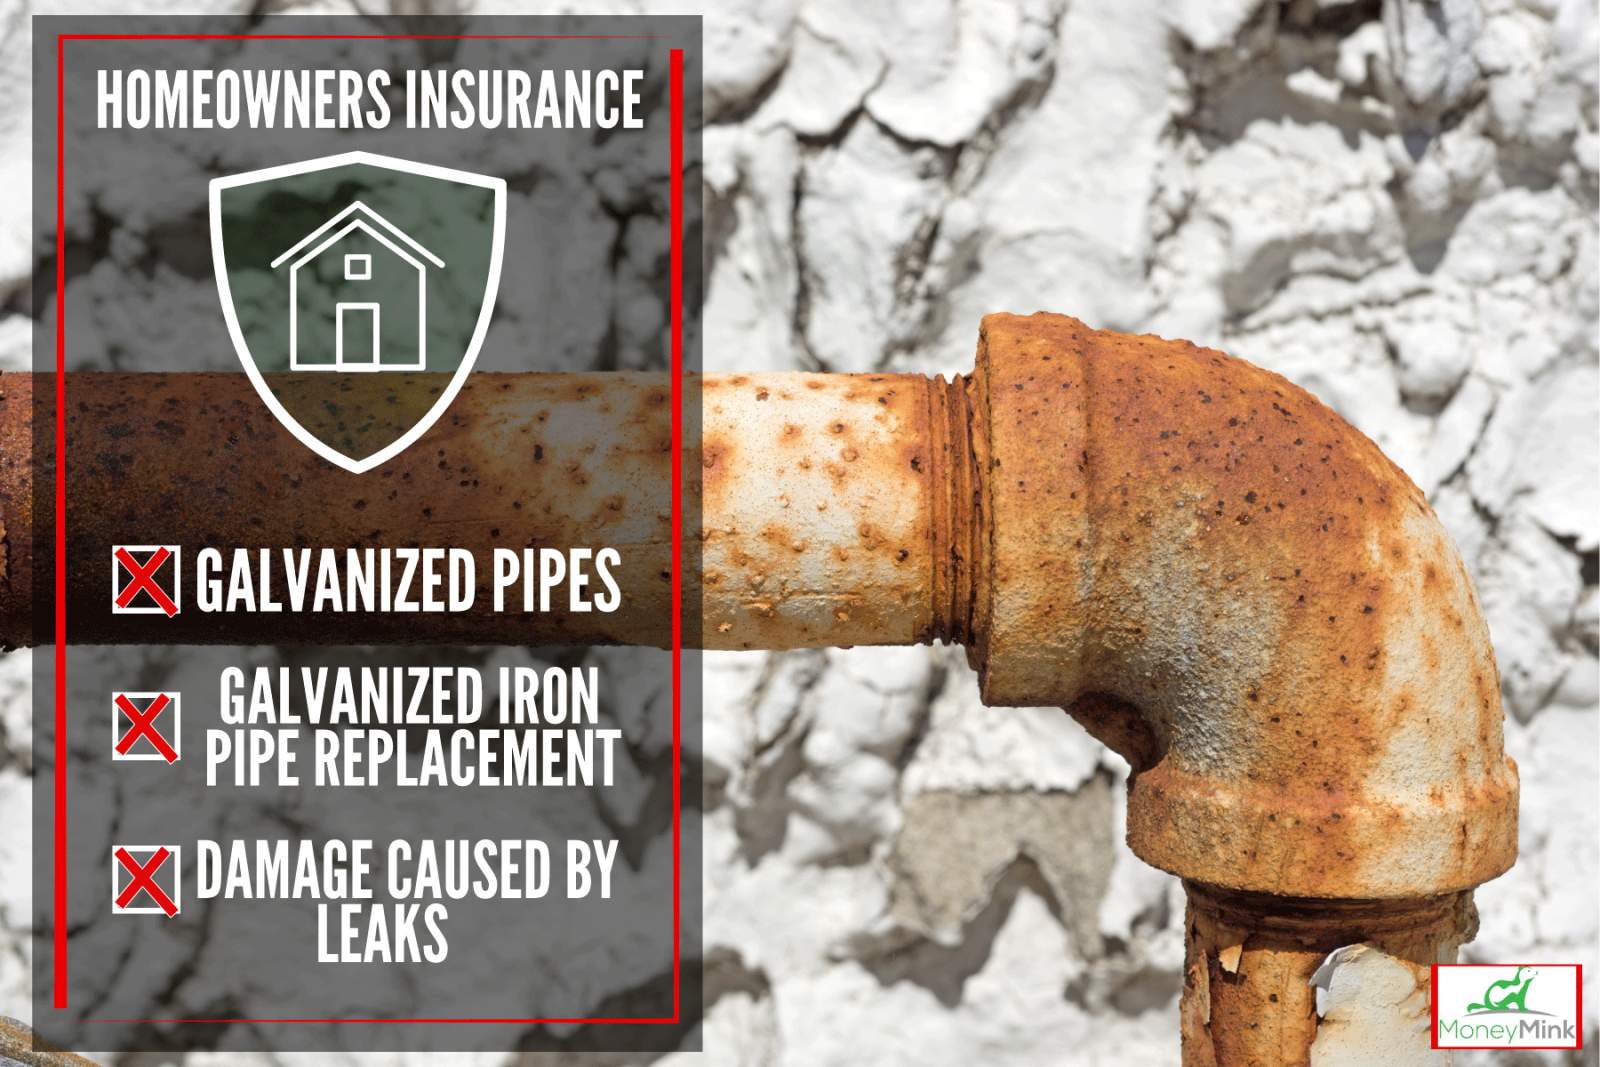 A rusted galvanized iron pipe for water line, Does Homeowners Insurance Cover Galvanized Pipes?